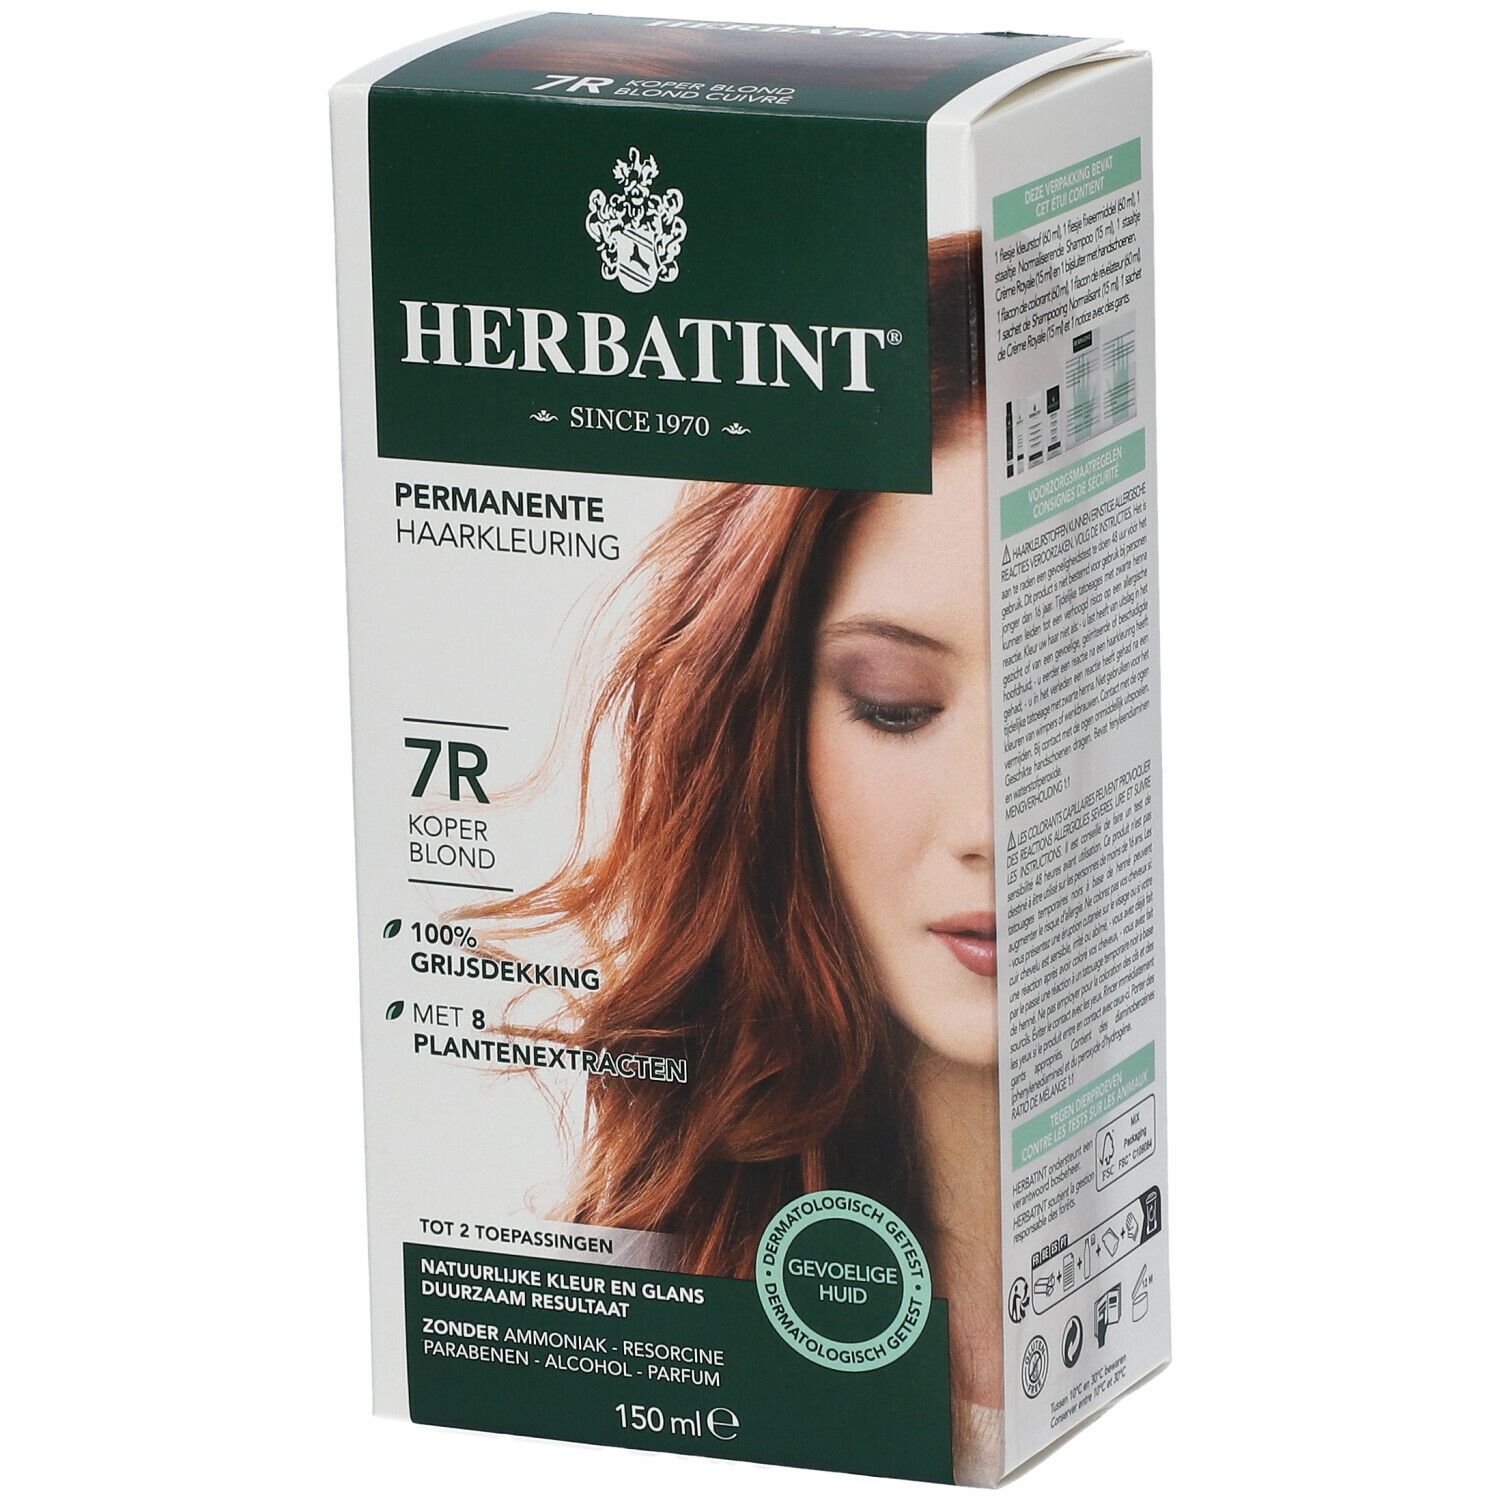 Herbatint Soin colorant permanent Blond Cuivre 7R